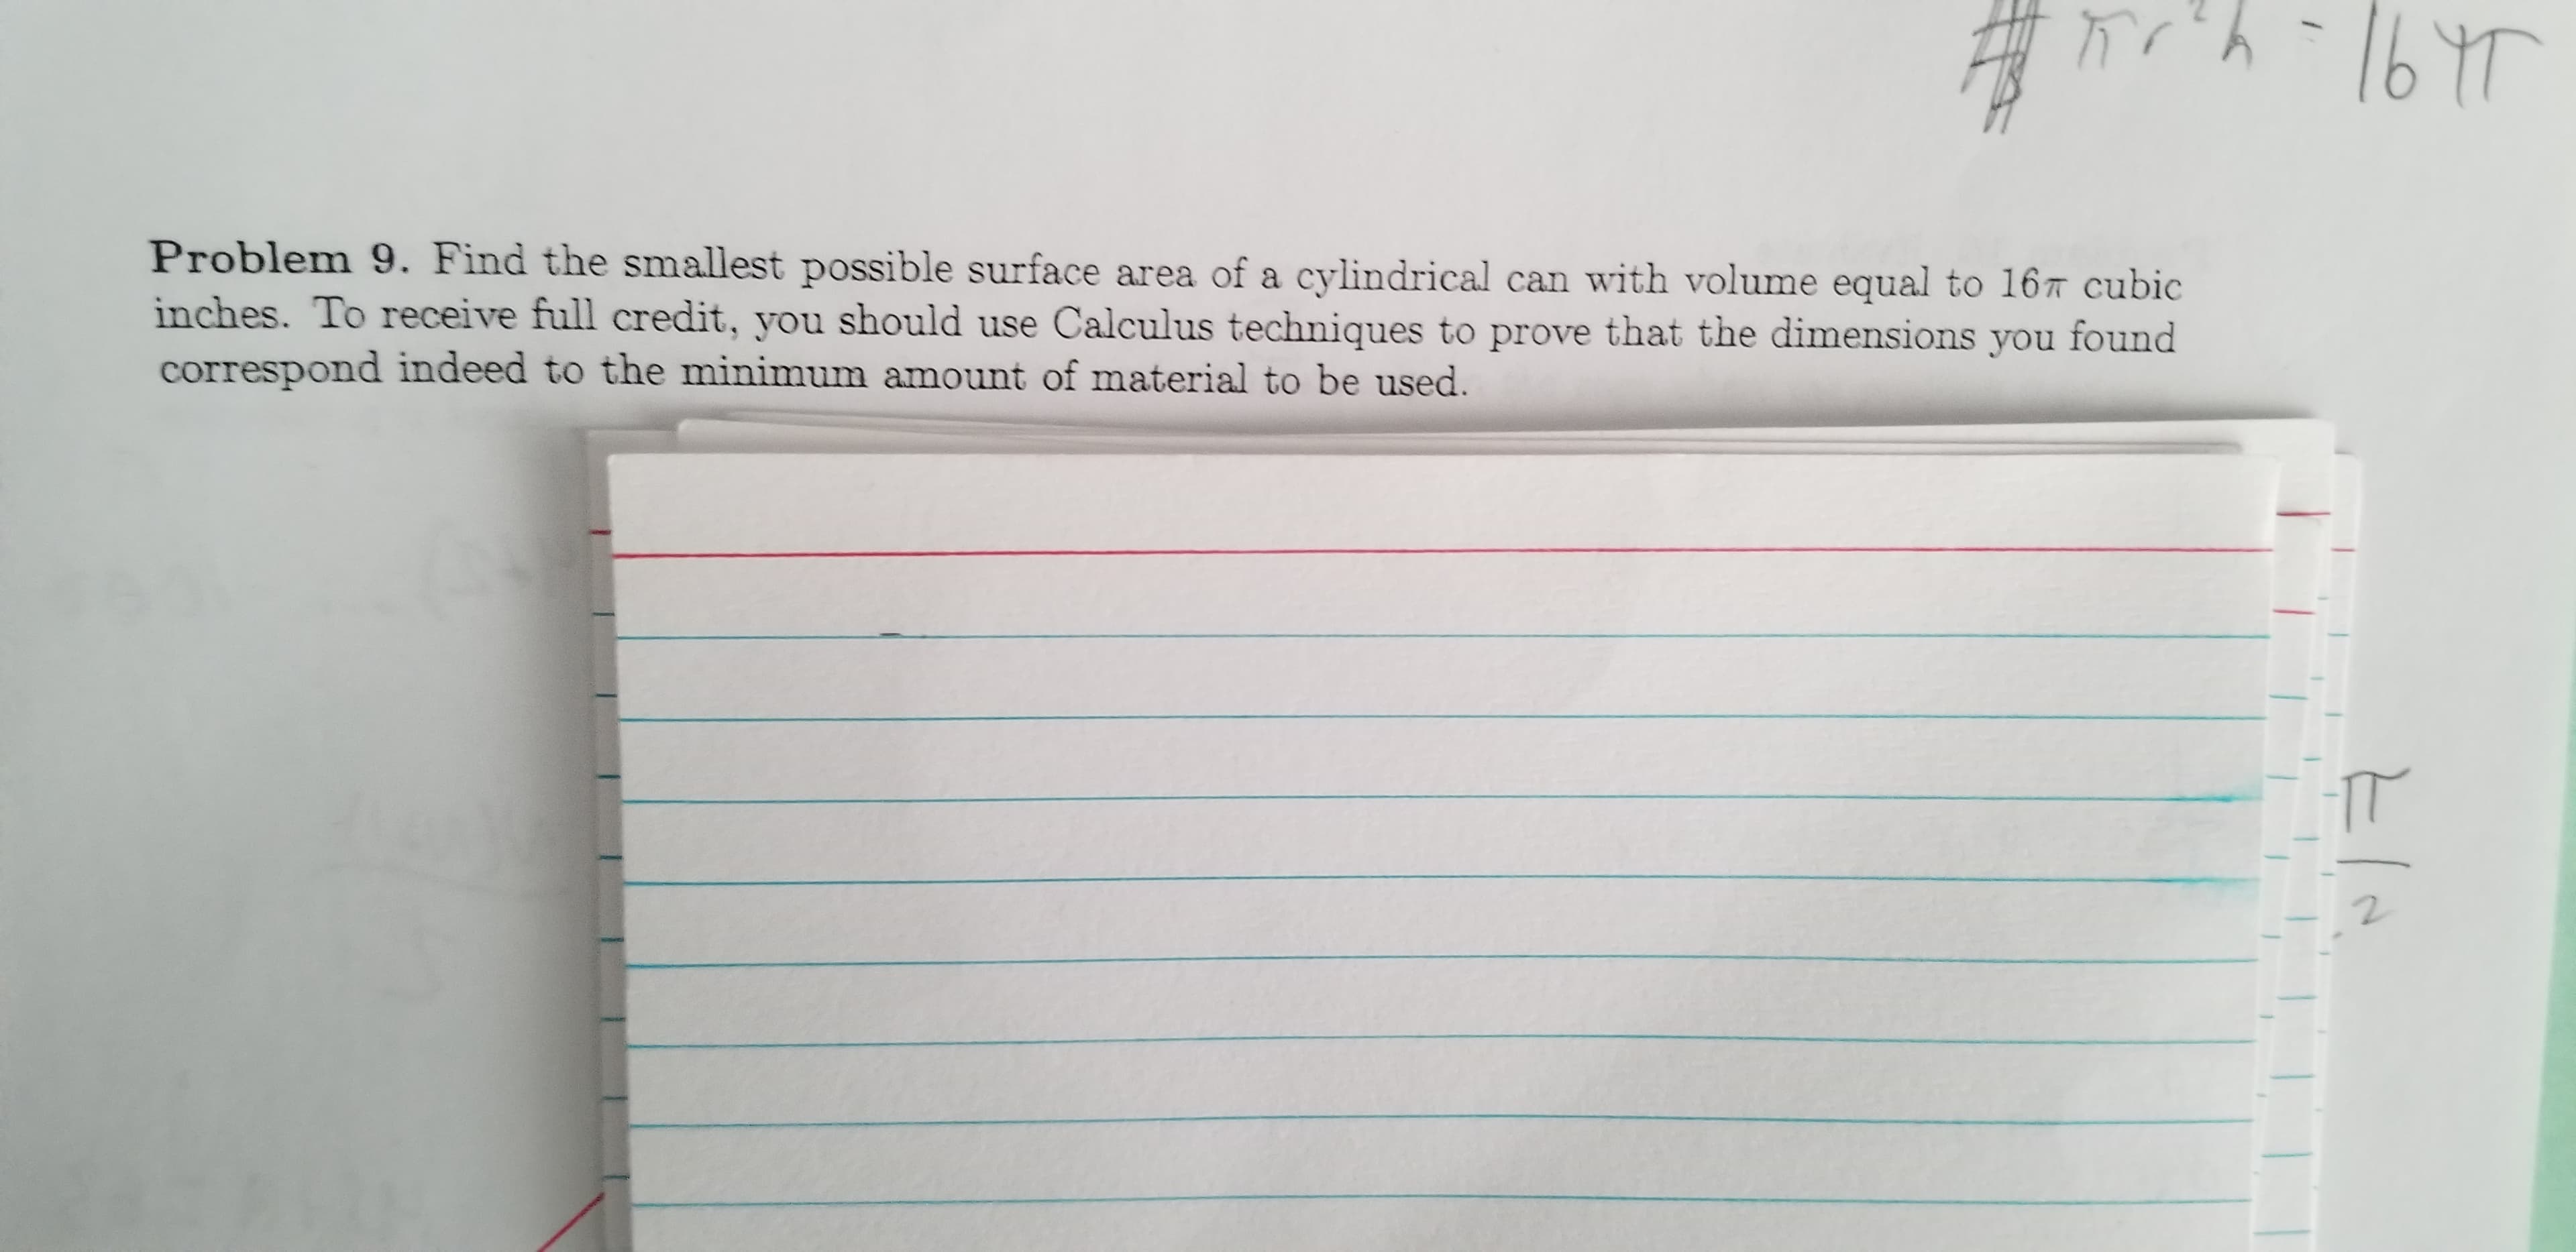 -1647
Problem 9. Find the smallest possible surface area of a cylindrical can with volume equal to 167 cubic
inches. To receive full credit, you should use Calculus techniques to prove that the dimensions you found
correspond indeed to the minimum amount of material to be used.
